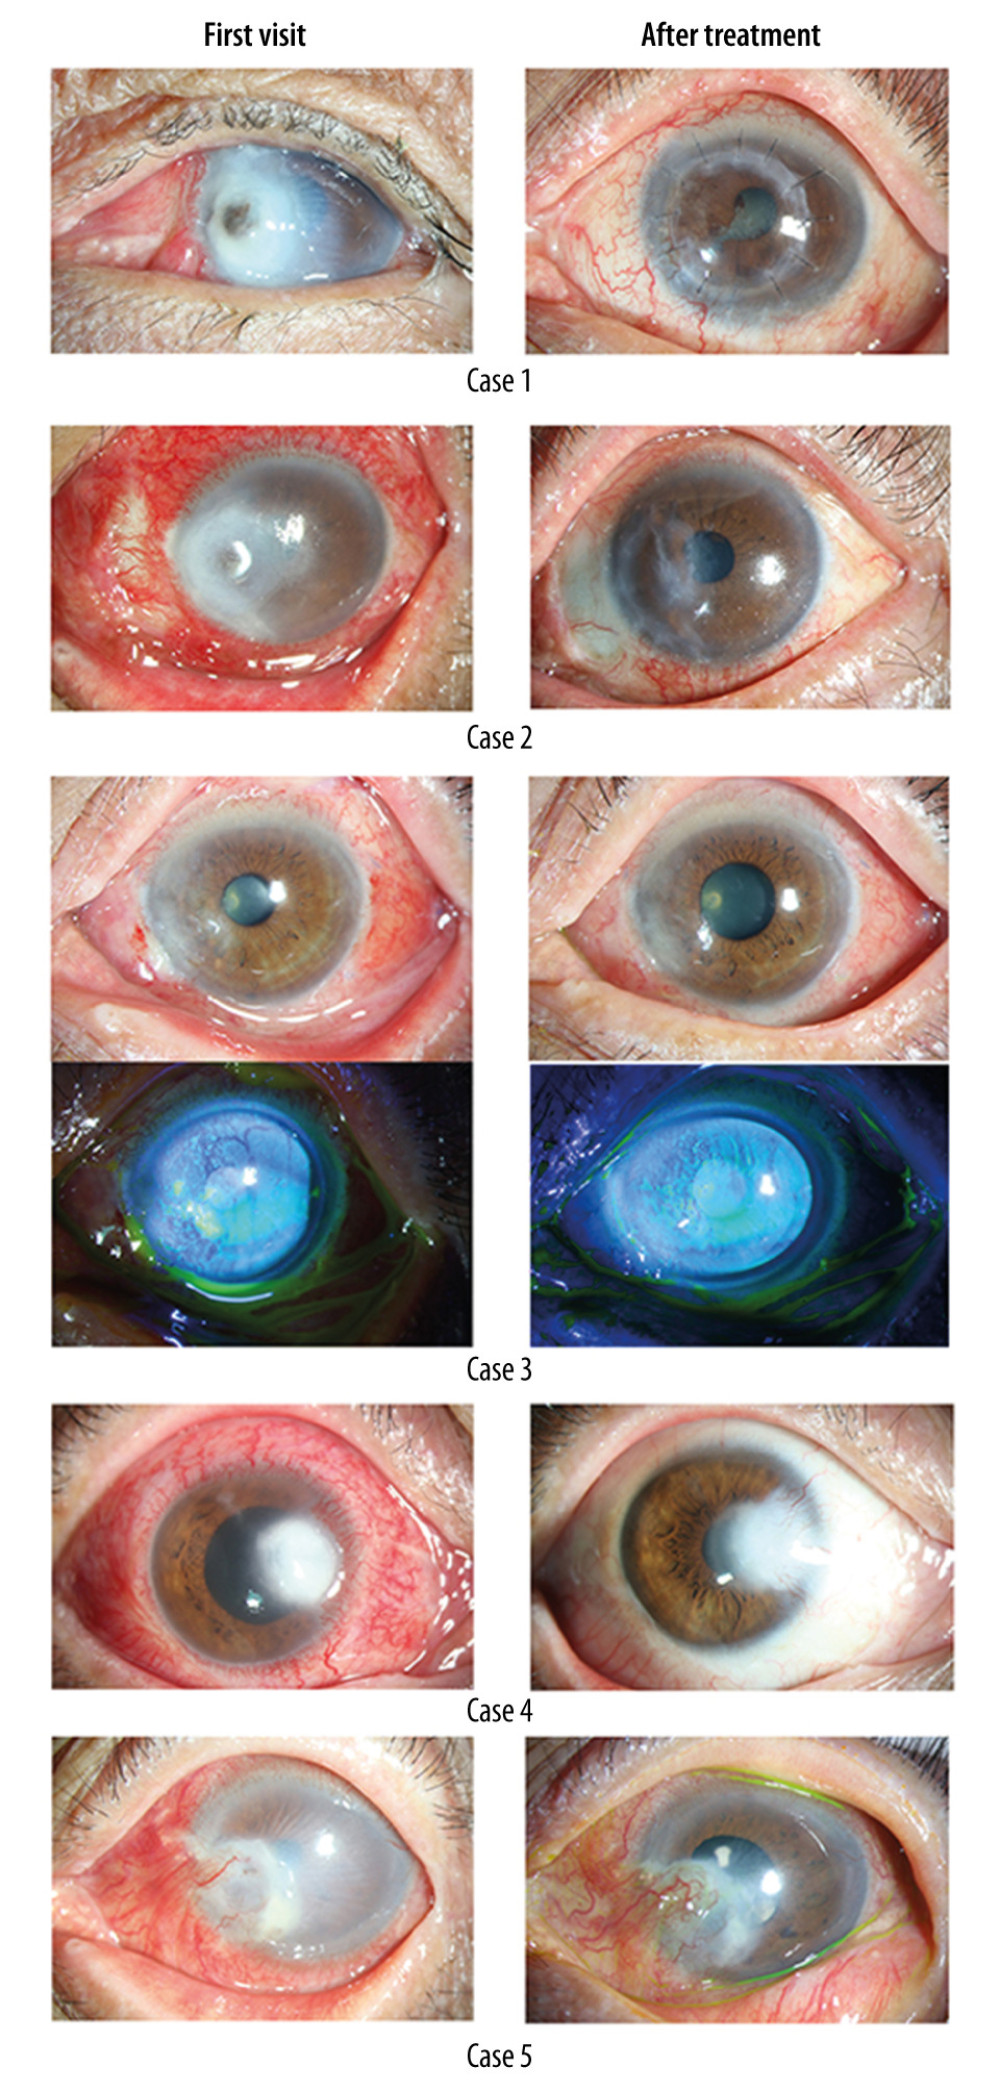 Photographs of 5 patients infected with herpes simplex after pterygium surgery.